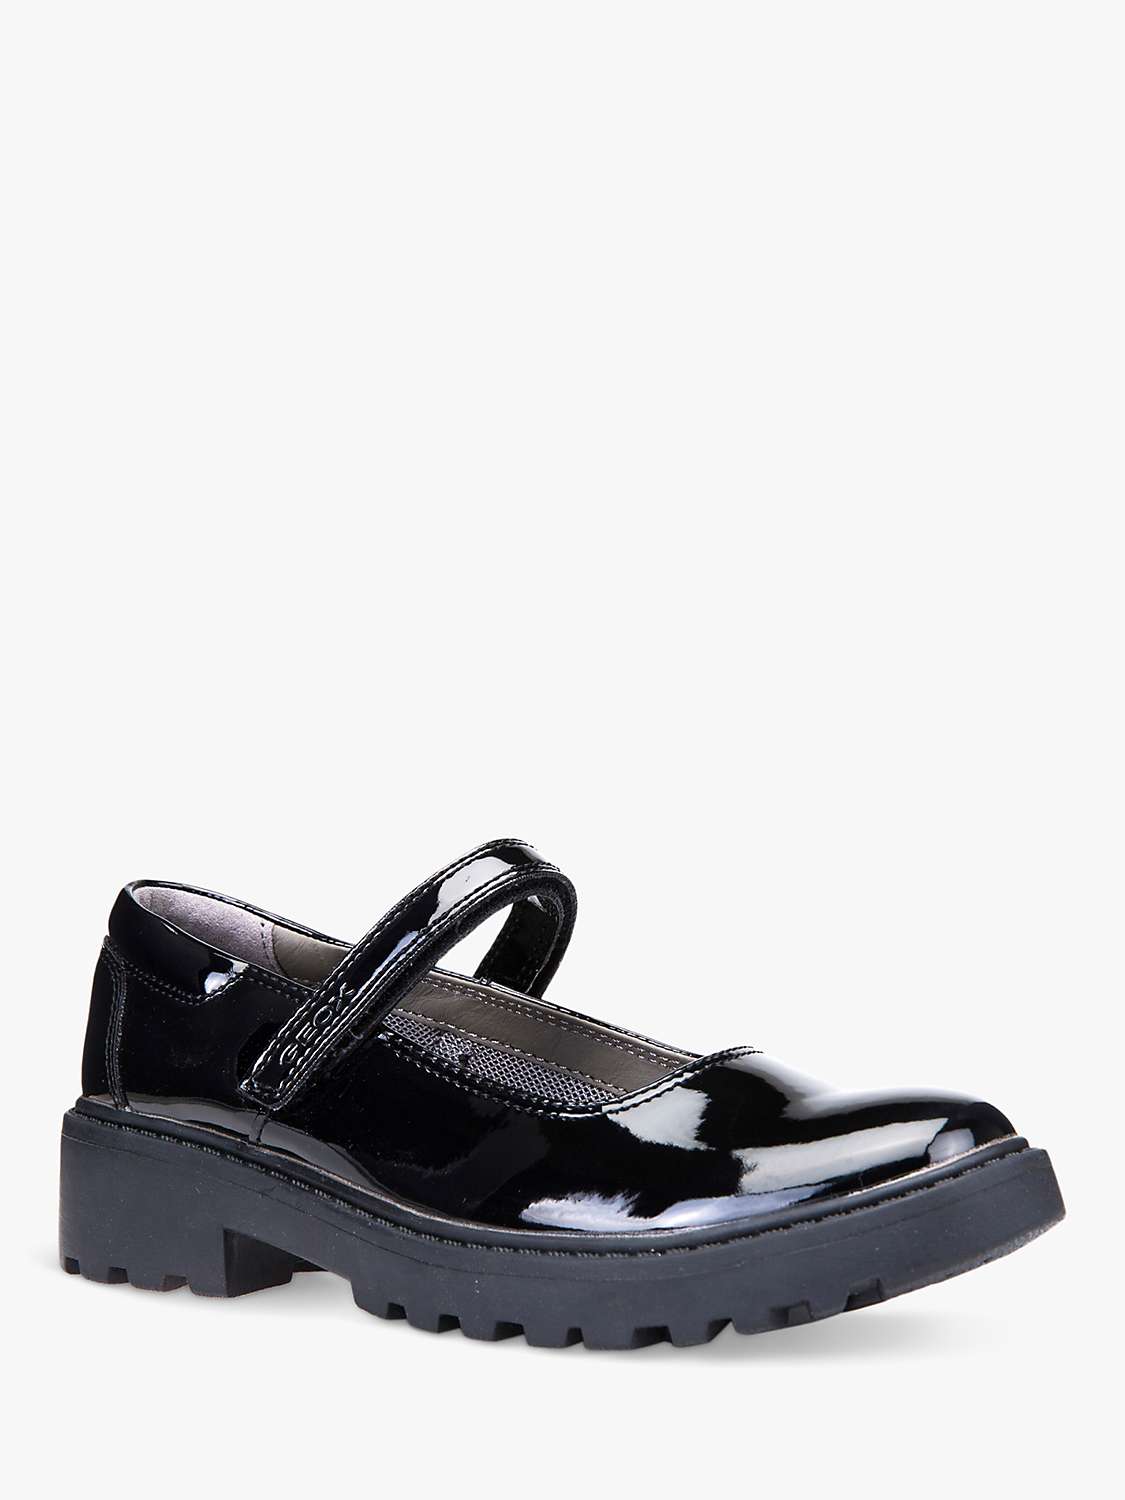 Buy Geox Kids' Casey Faux Leather Mary Jane Patent School Shoes, Black Online at johnlewis.com